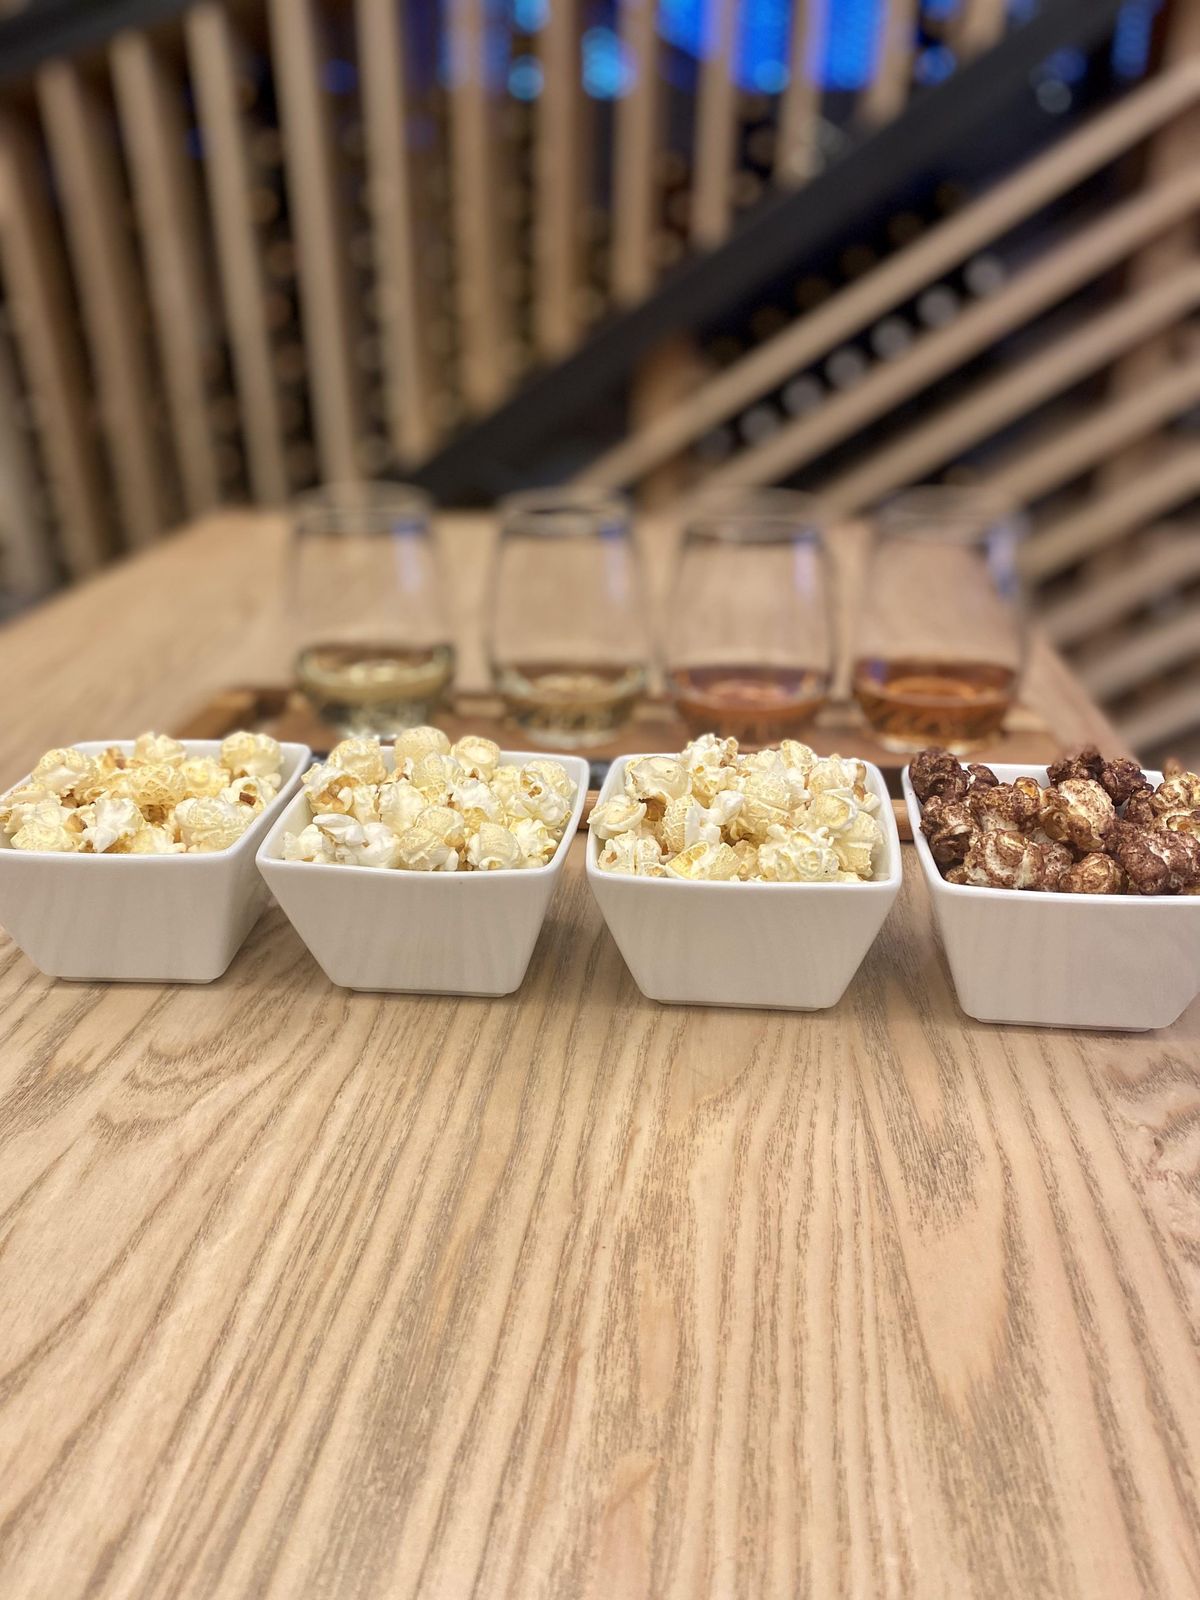 Sparkling Wine Tasting and Popcorn Pairing | 7 PM - RSVP AHEAD